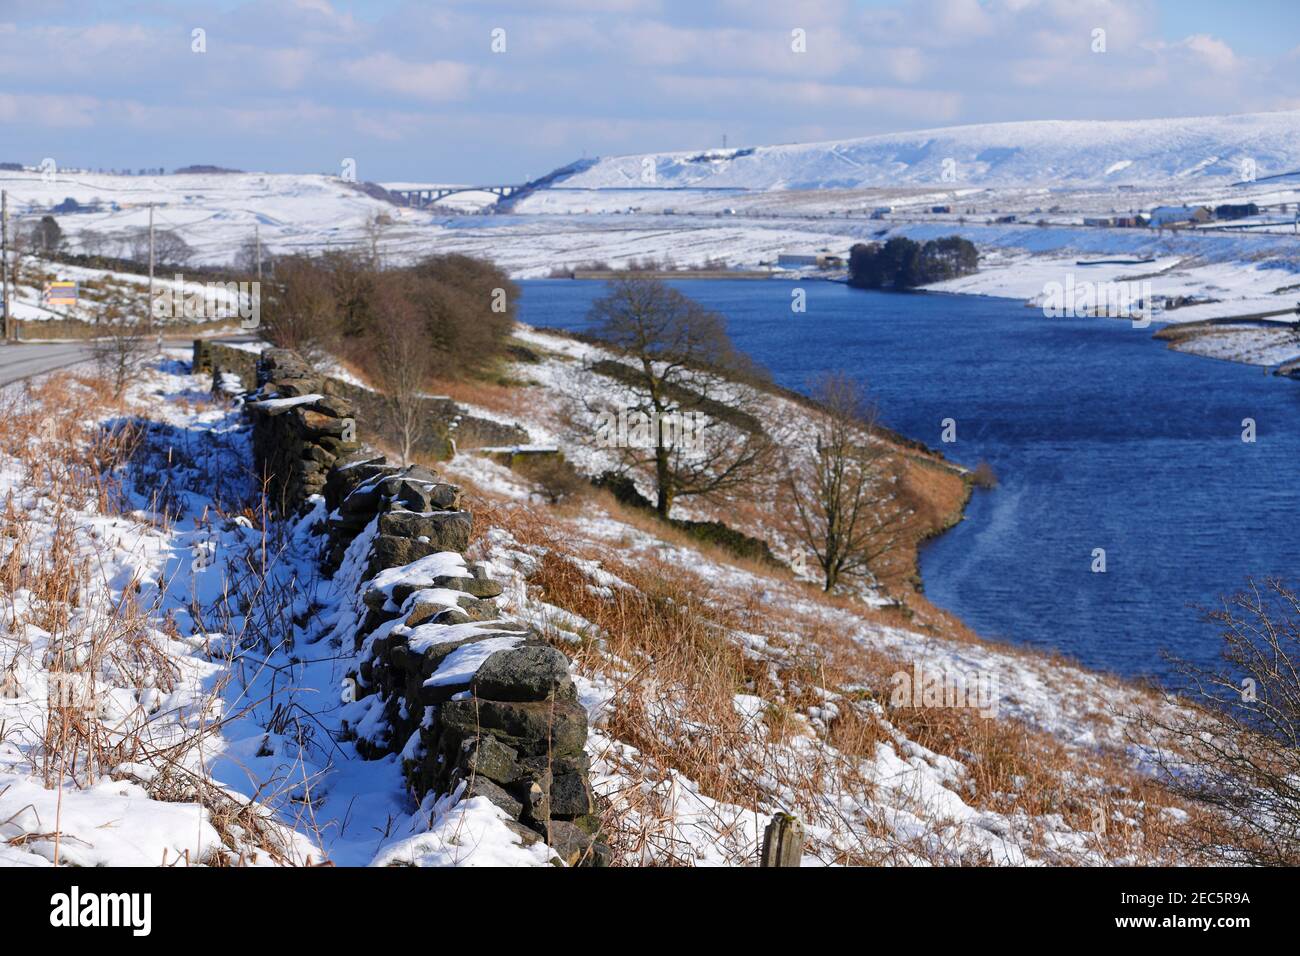 Looking across Booth Wood Reservoir towards Scammonden Bridge  the spans the M62. Stock Photo